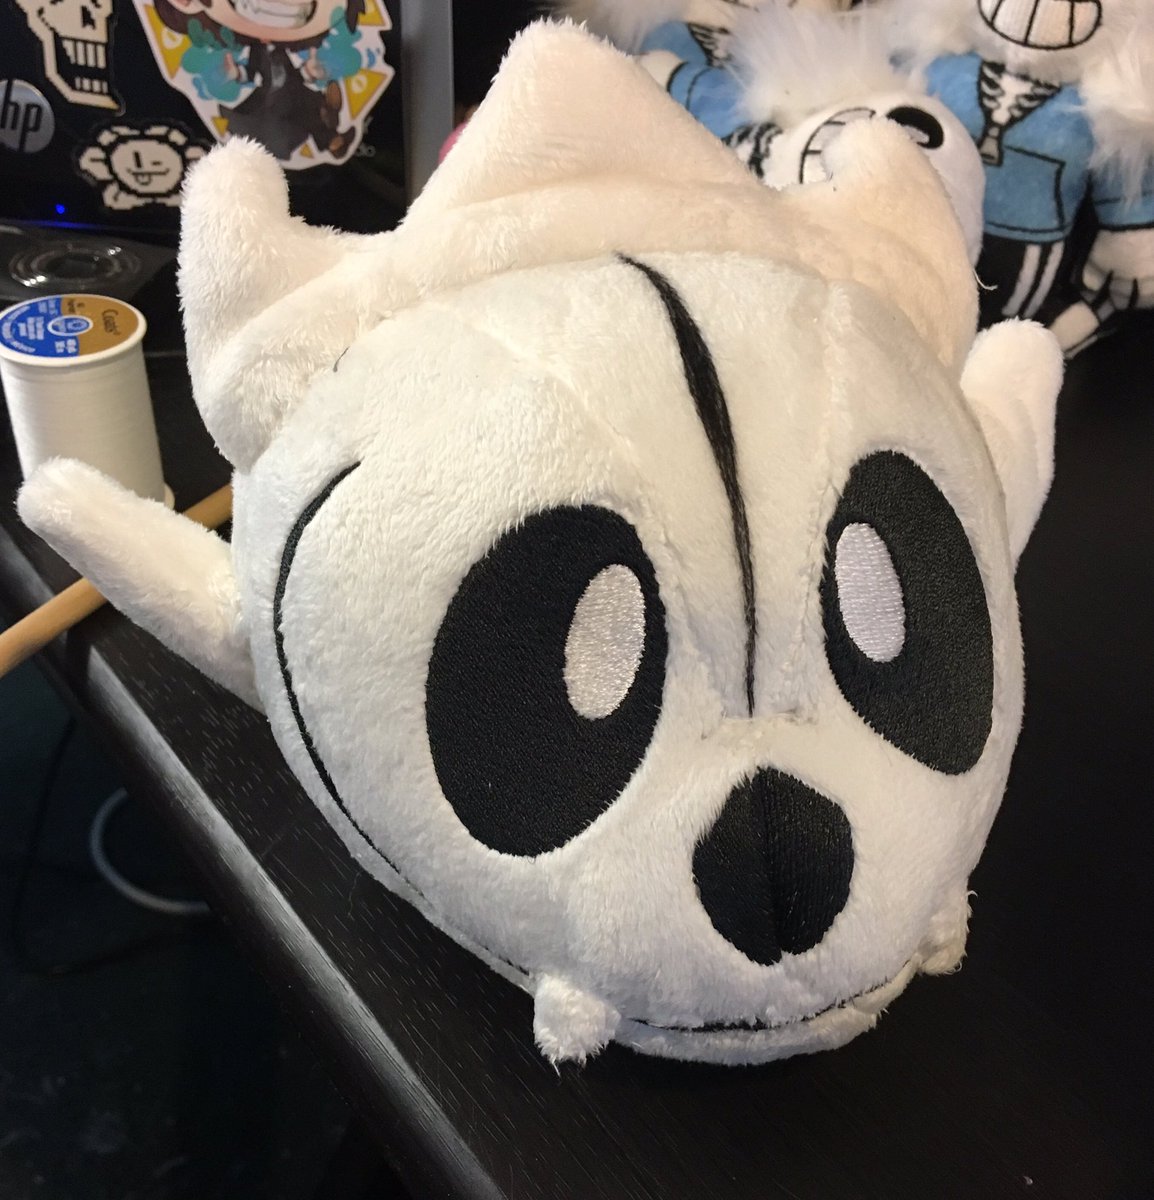 Happykittyshop On Twitter Super Happy How This Gaster Blaster